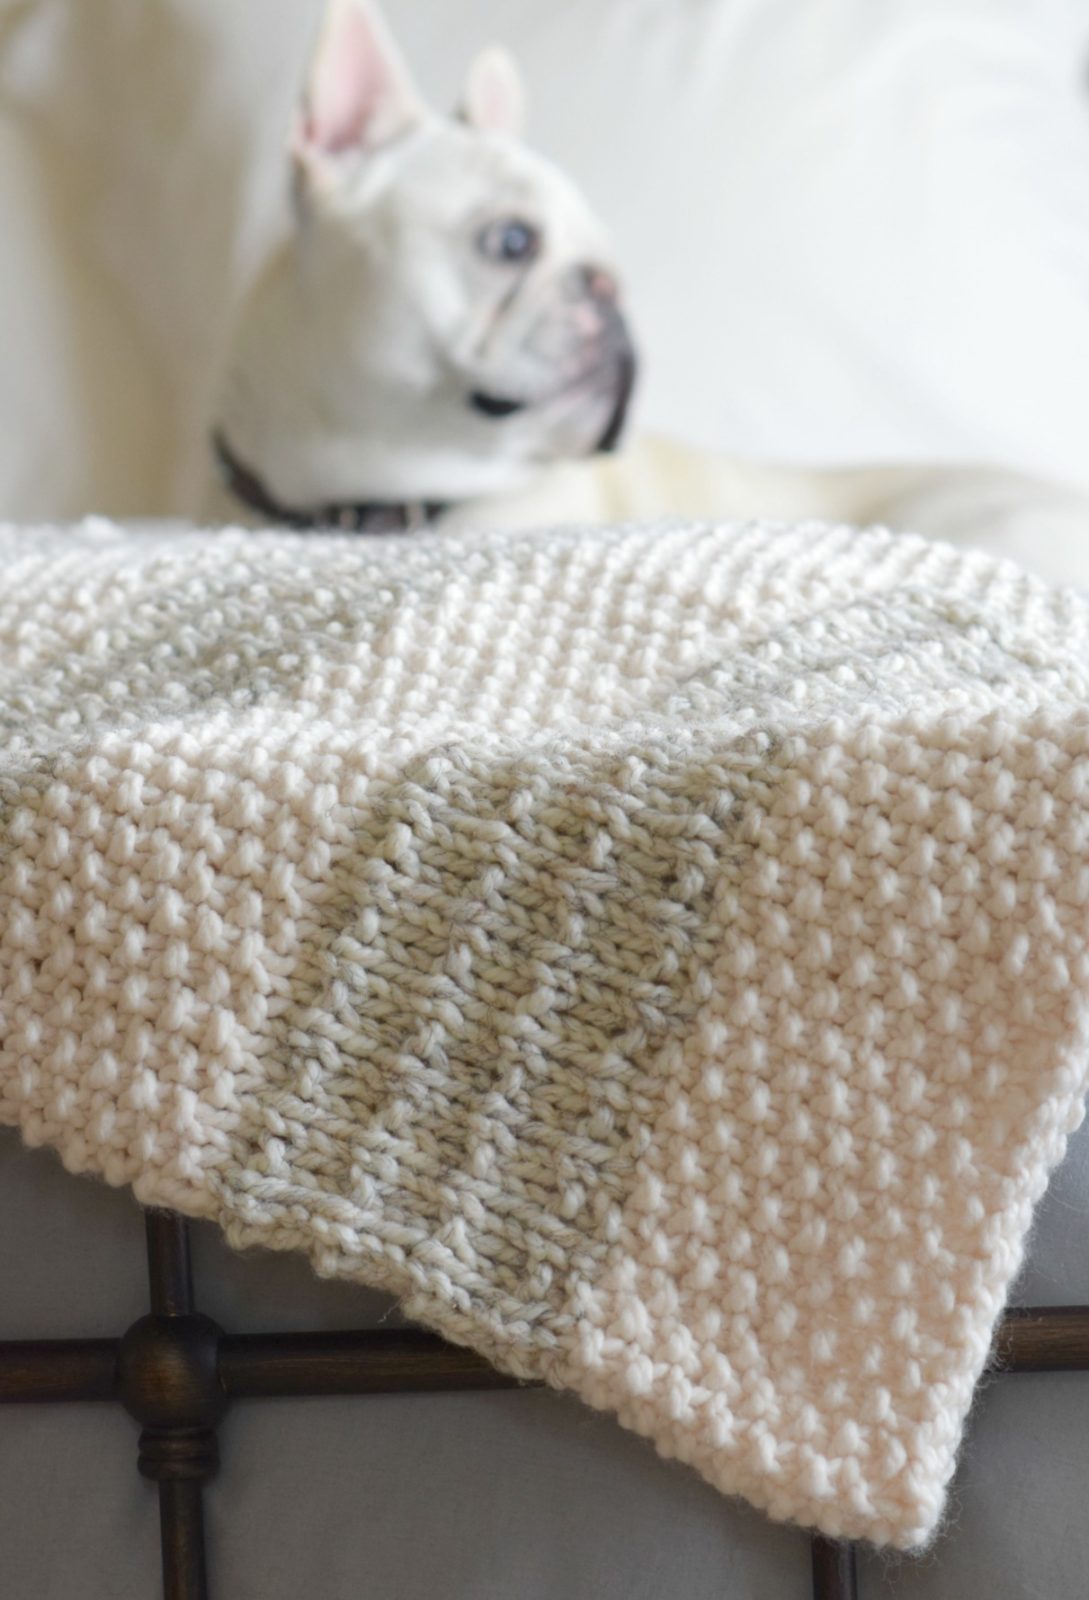 25 Stunning and Free Knitting Patterns Made With Lion Brand